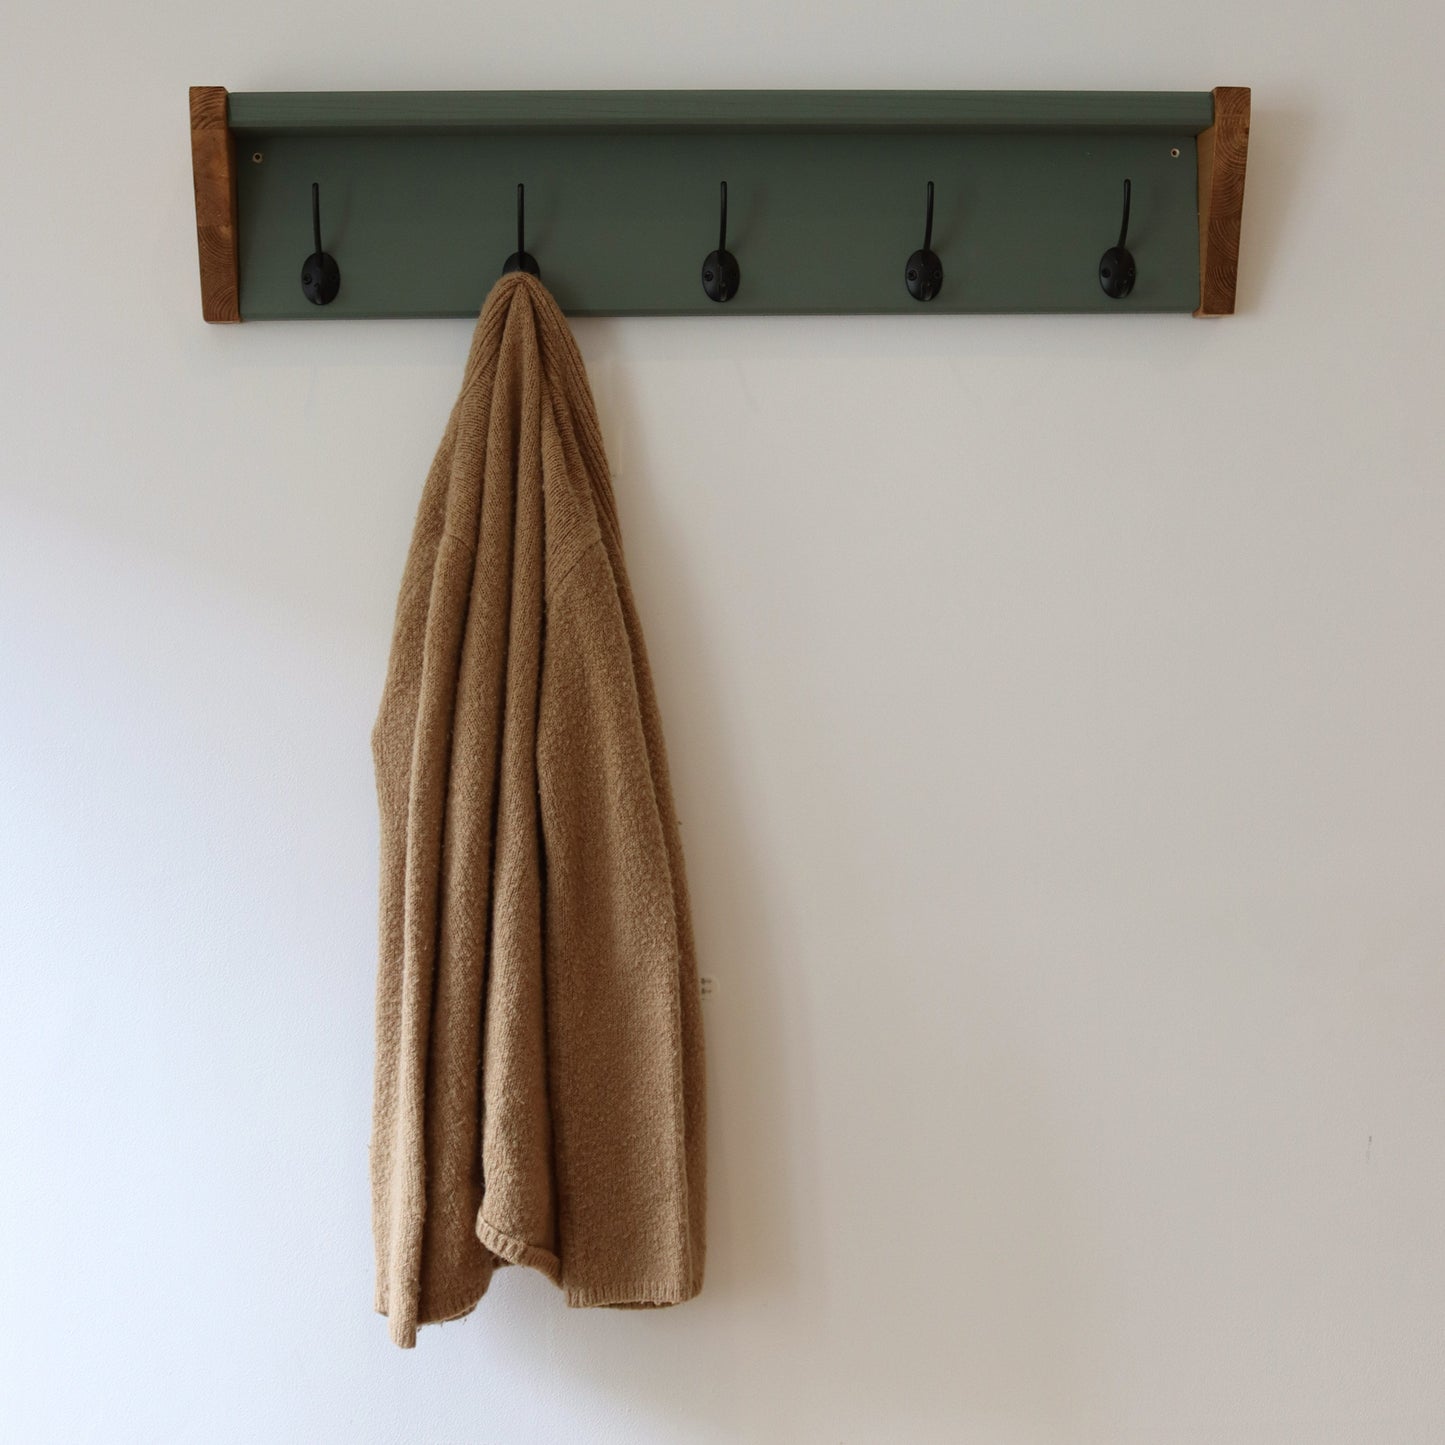 Coat Hook and Shoe Rack Storage Narrow 60 cm by 22 cm by 50 cm